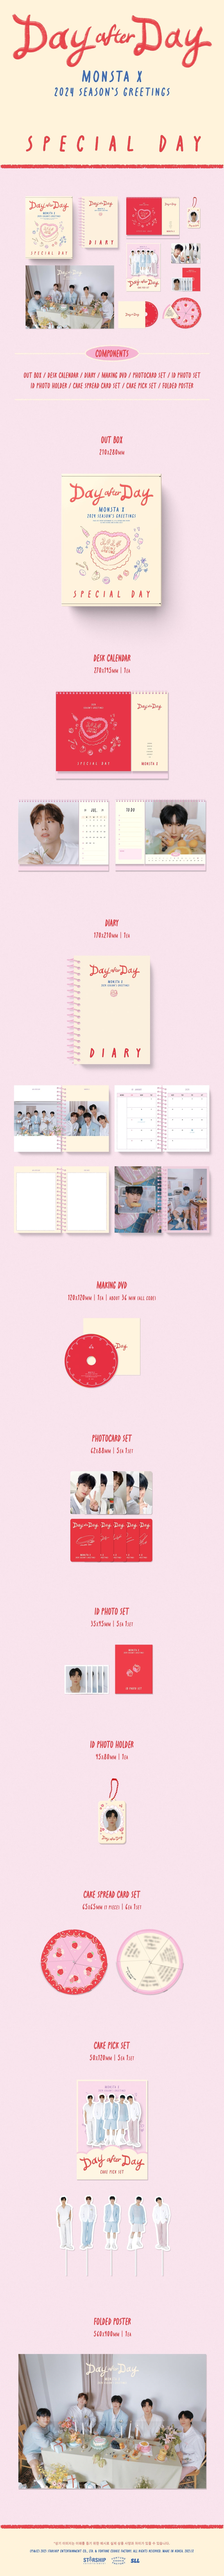 MONSTA X - 2024 SEASON'S GREETINGS [Day after Day] (SET ver.)